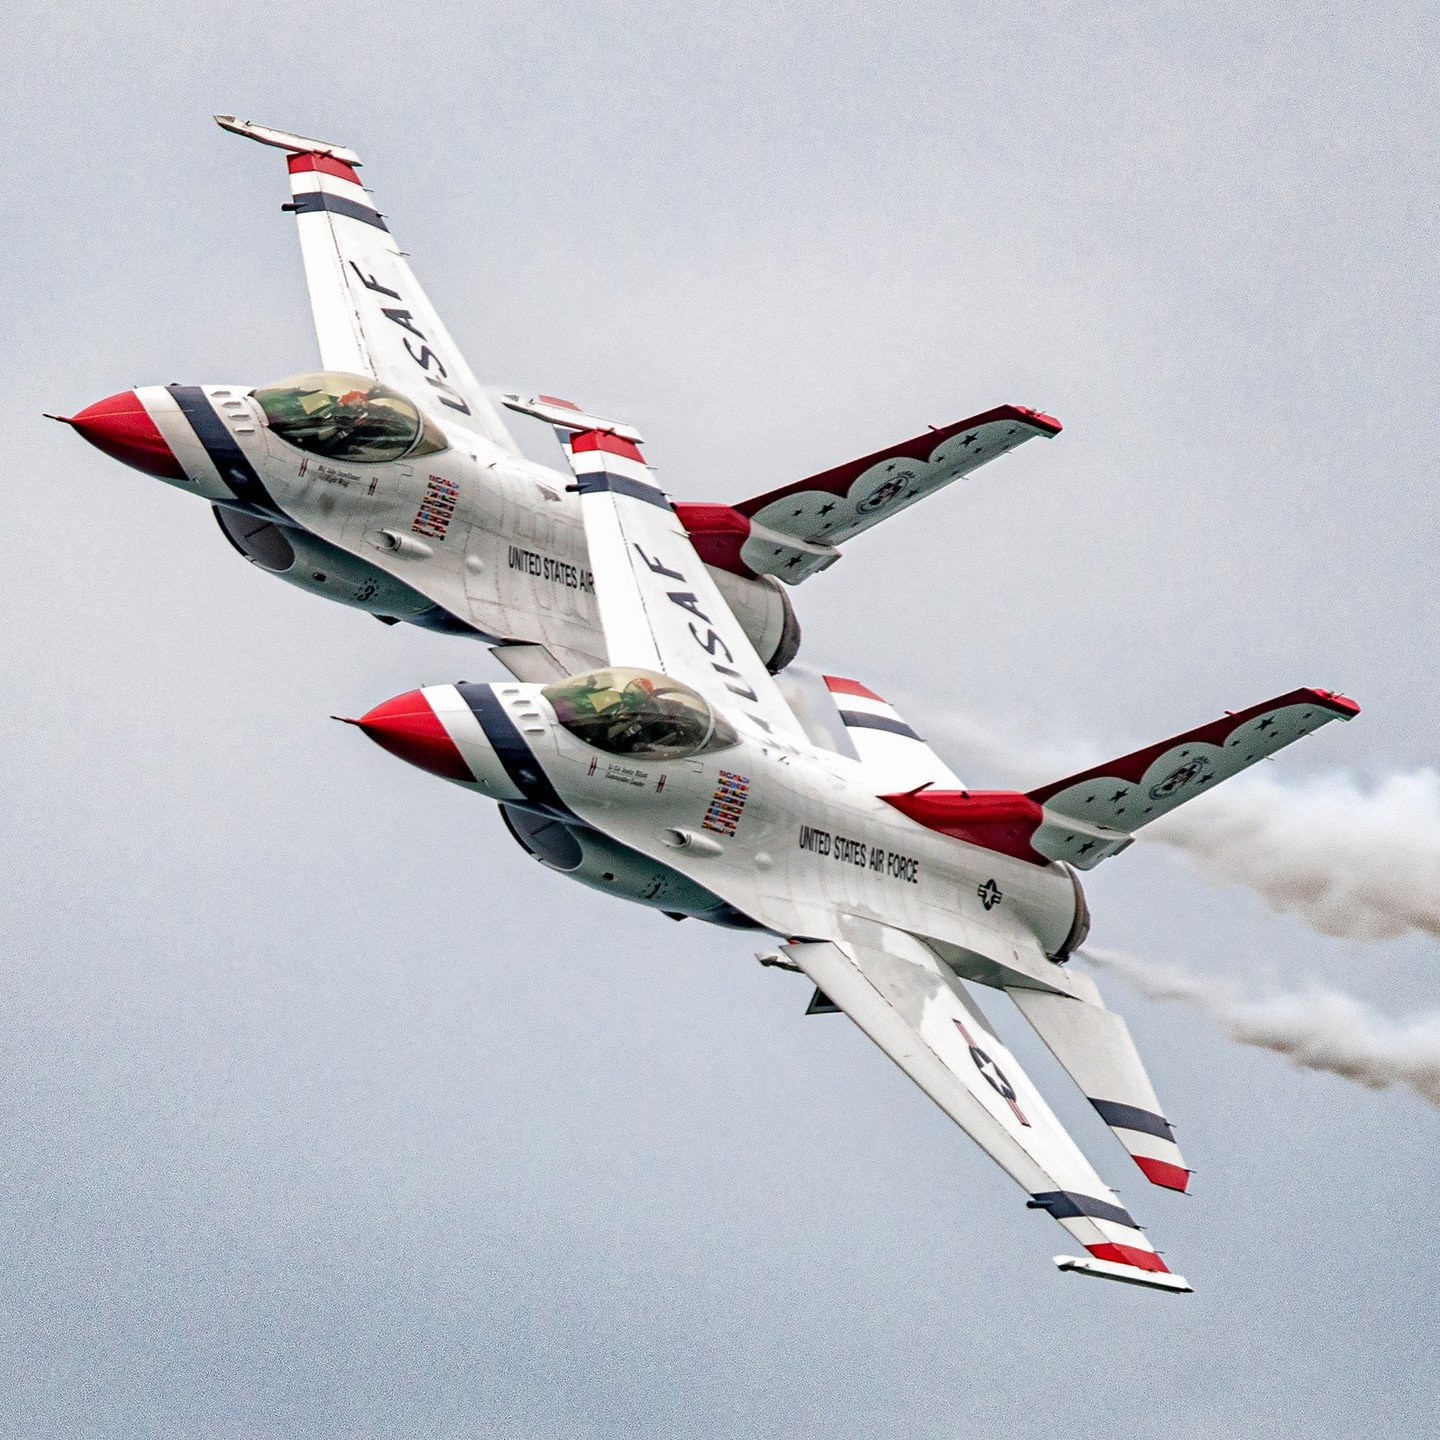 Two worlds collide! We are immensely proud to be dressing the #SuperBowl with signage, while our old pals at the @afthunderbirds, are set to rip through the skies above... Wouldn't it be great if the USAF Thunderbirds also returned to iconic Huntingt